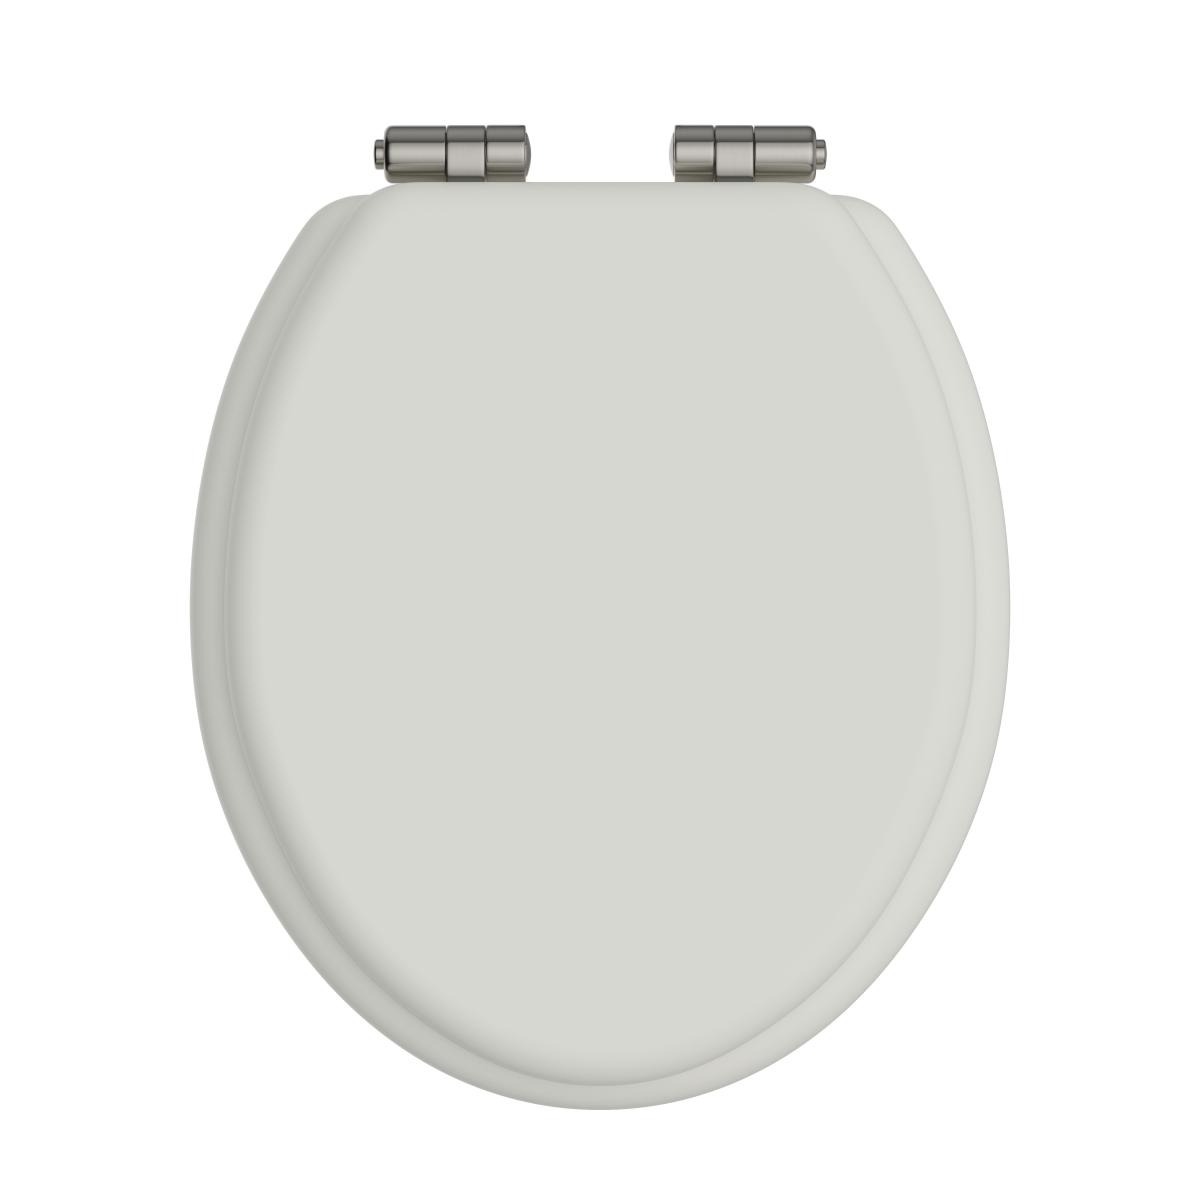 Toilet Seat Soft Close Brushed Nickel Hinges - Chantilly